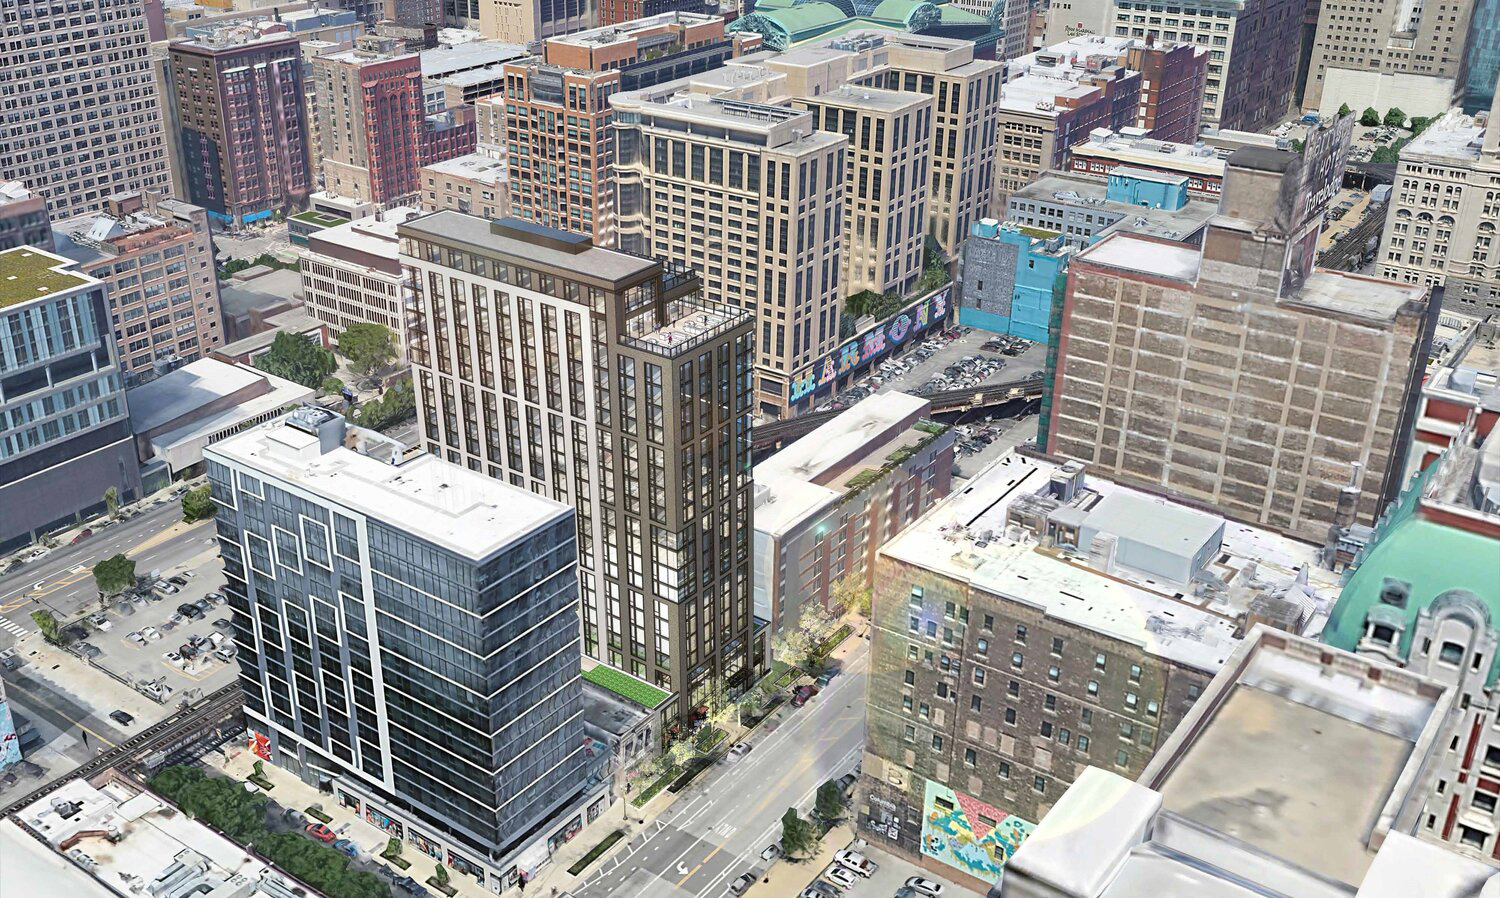 View of 630 S Wabash Avenue. Rendering by Antunovich Associates